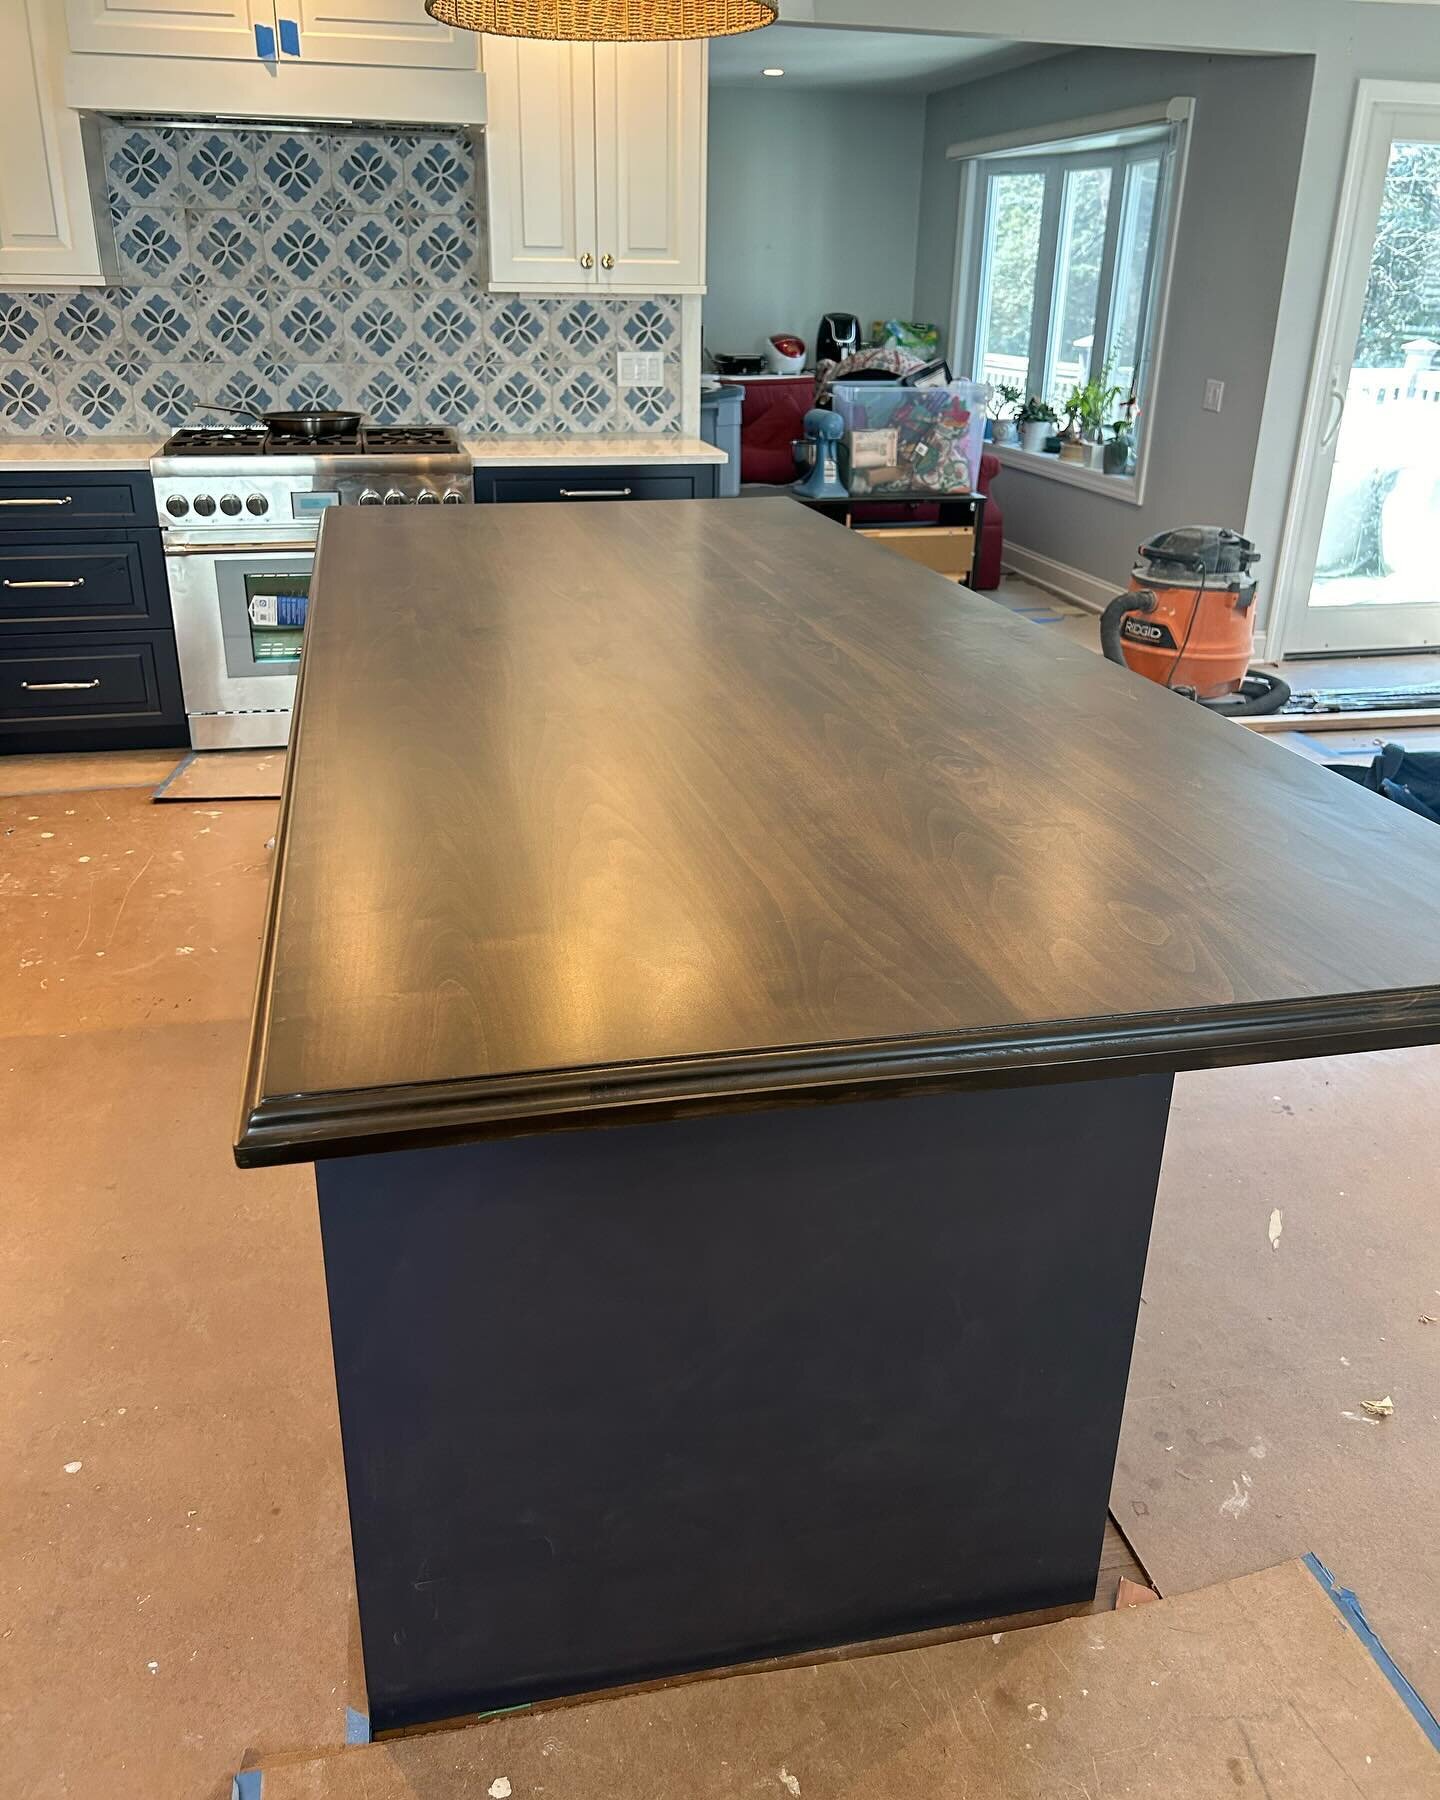 Measuring in at 45&rdquo; wide and 108 1/2&rdquo; long and 1.5&rdquo; thick, this recently completed Kitchen Island countertop for Hawthorne Group contractor, was delivered last week, amongst the mudroom project (see previous post) Used Alder and sta